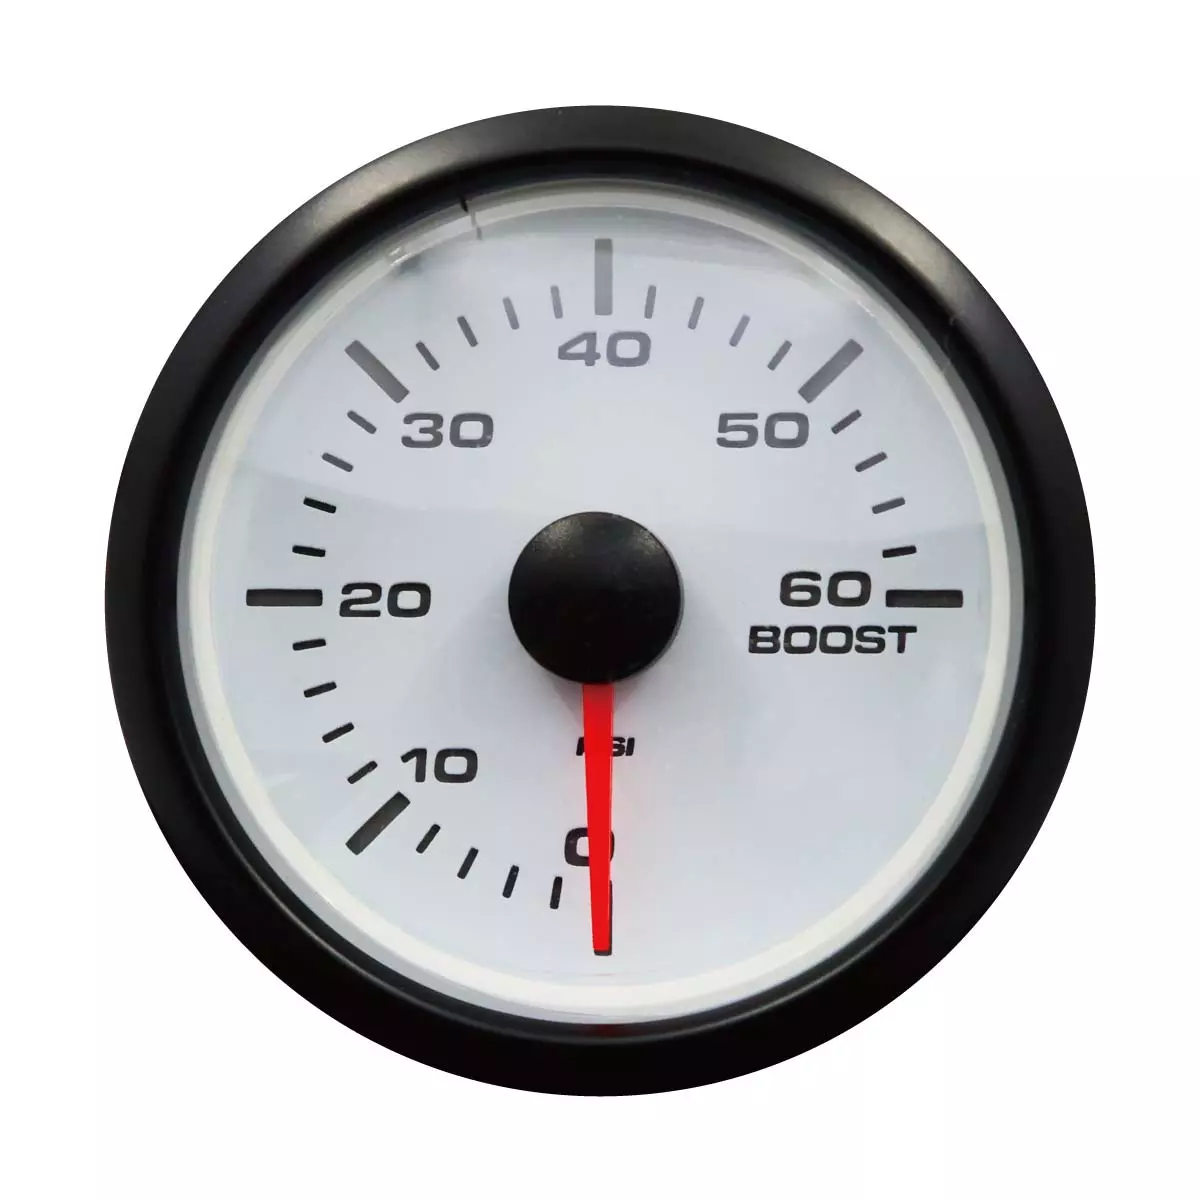 White LED Digital 60 PSI Boost Gauge Kit Includes Electronic Pressure Sensor Waterproof Pin-Style install